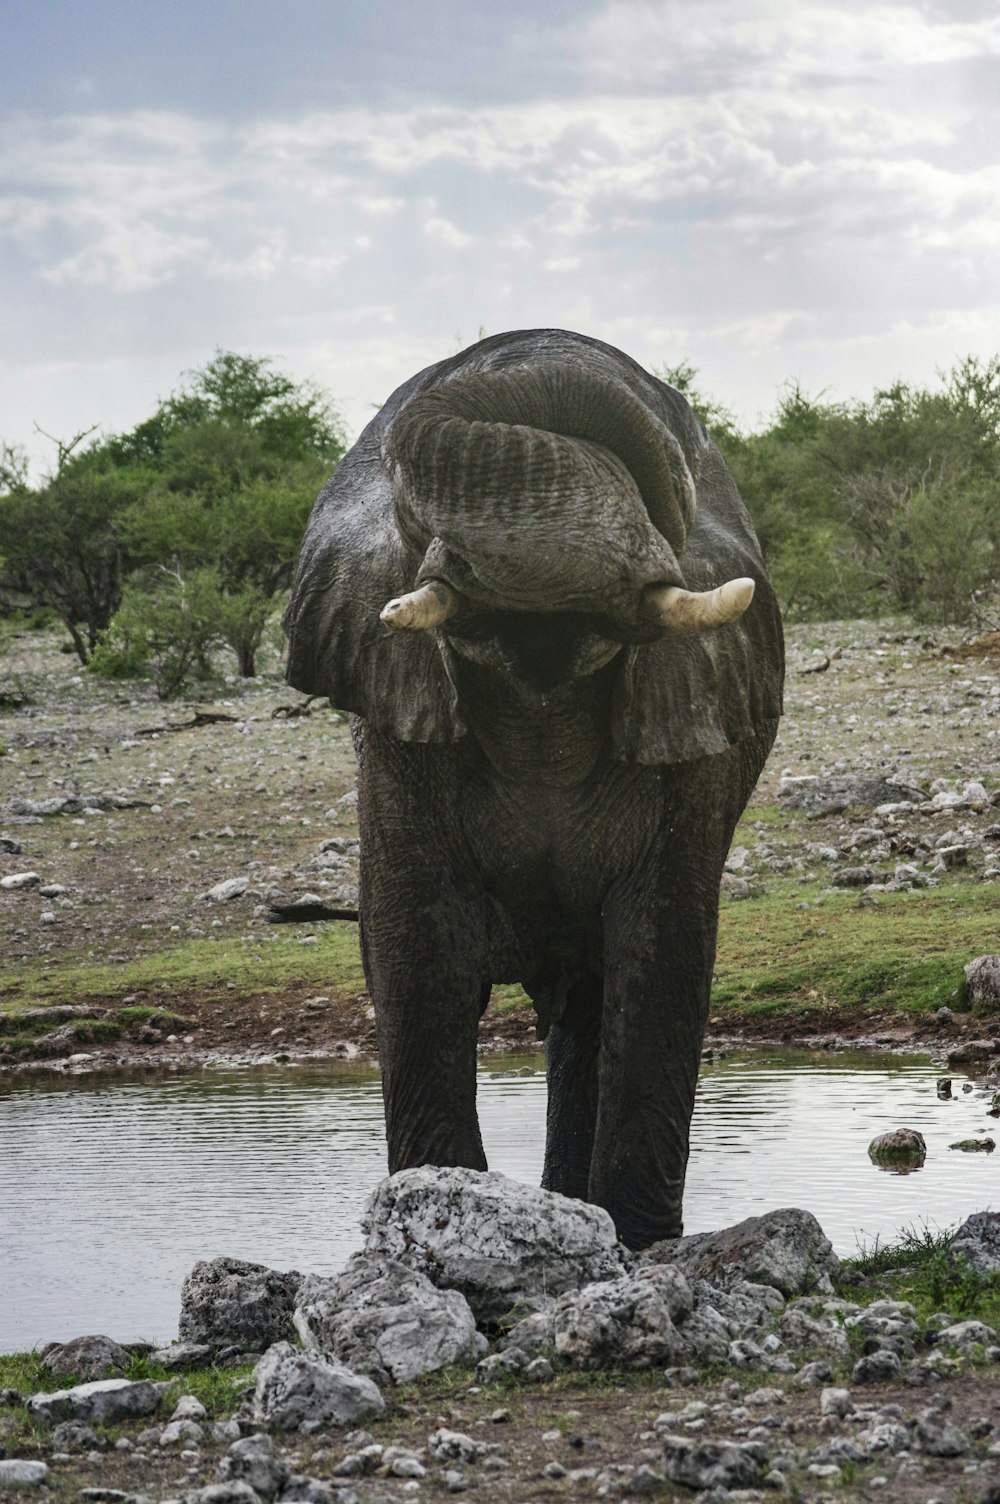 an elephant standing next to a body of water